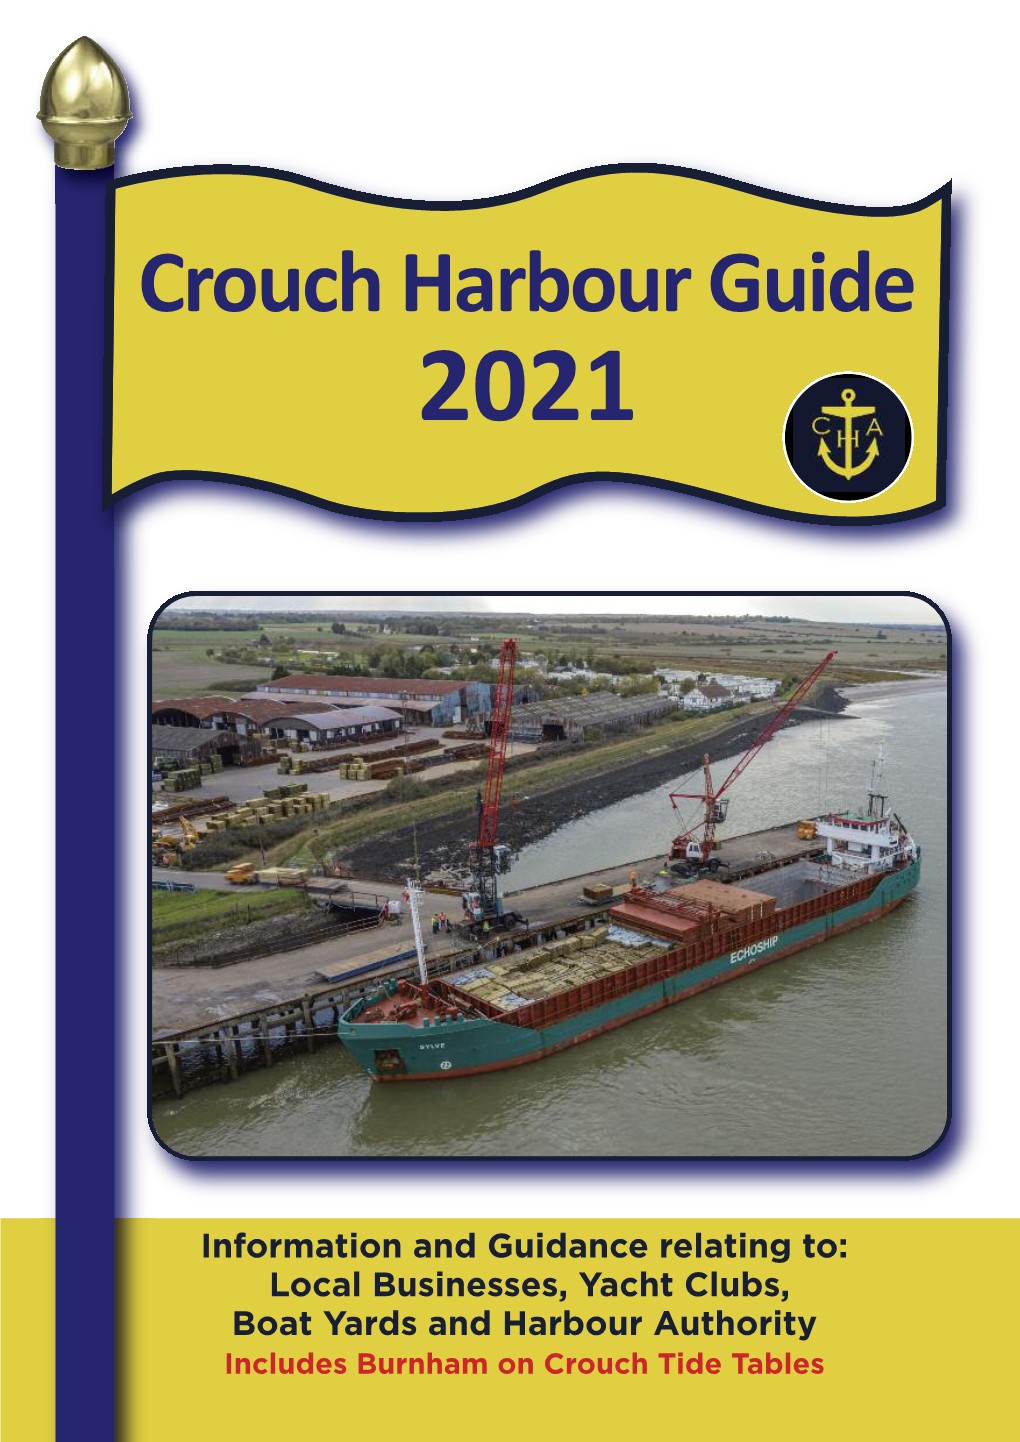 Crouch Harbour Guide 2021